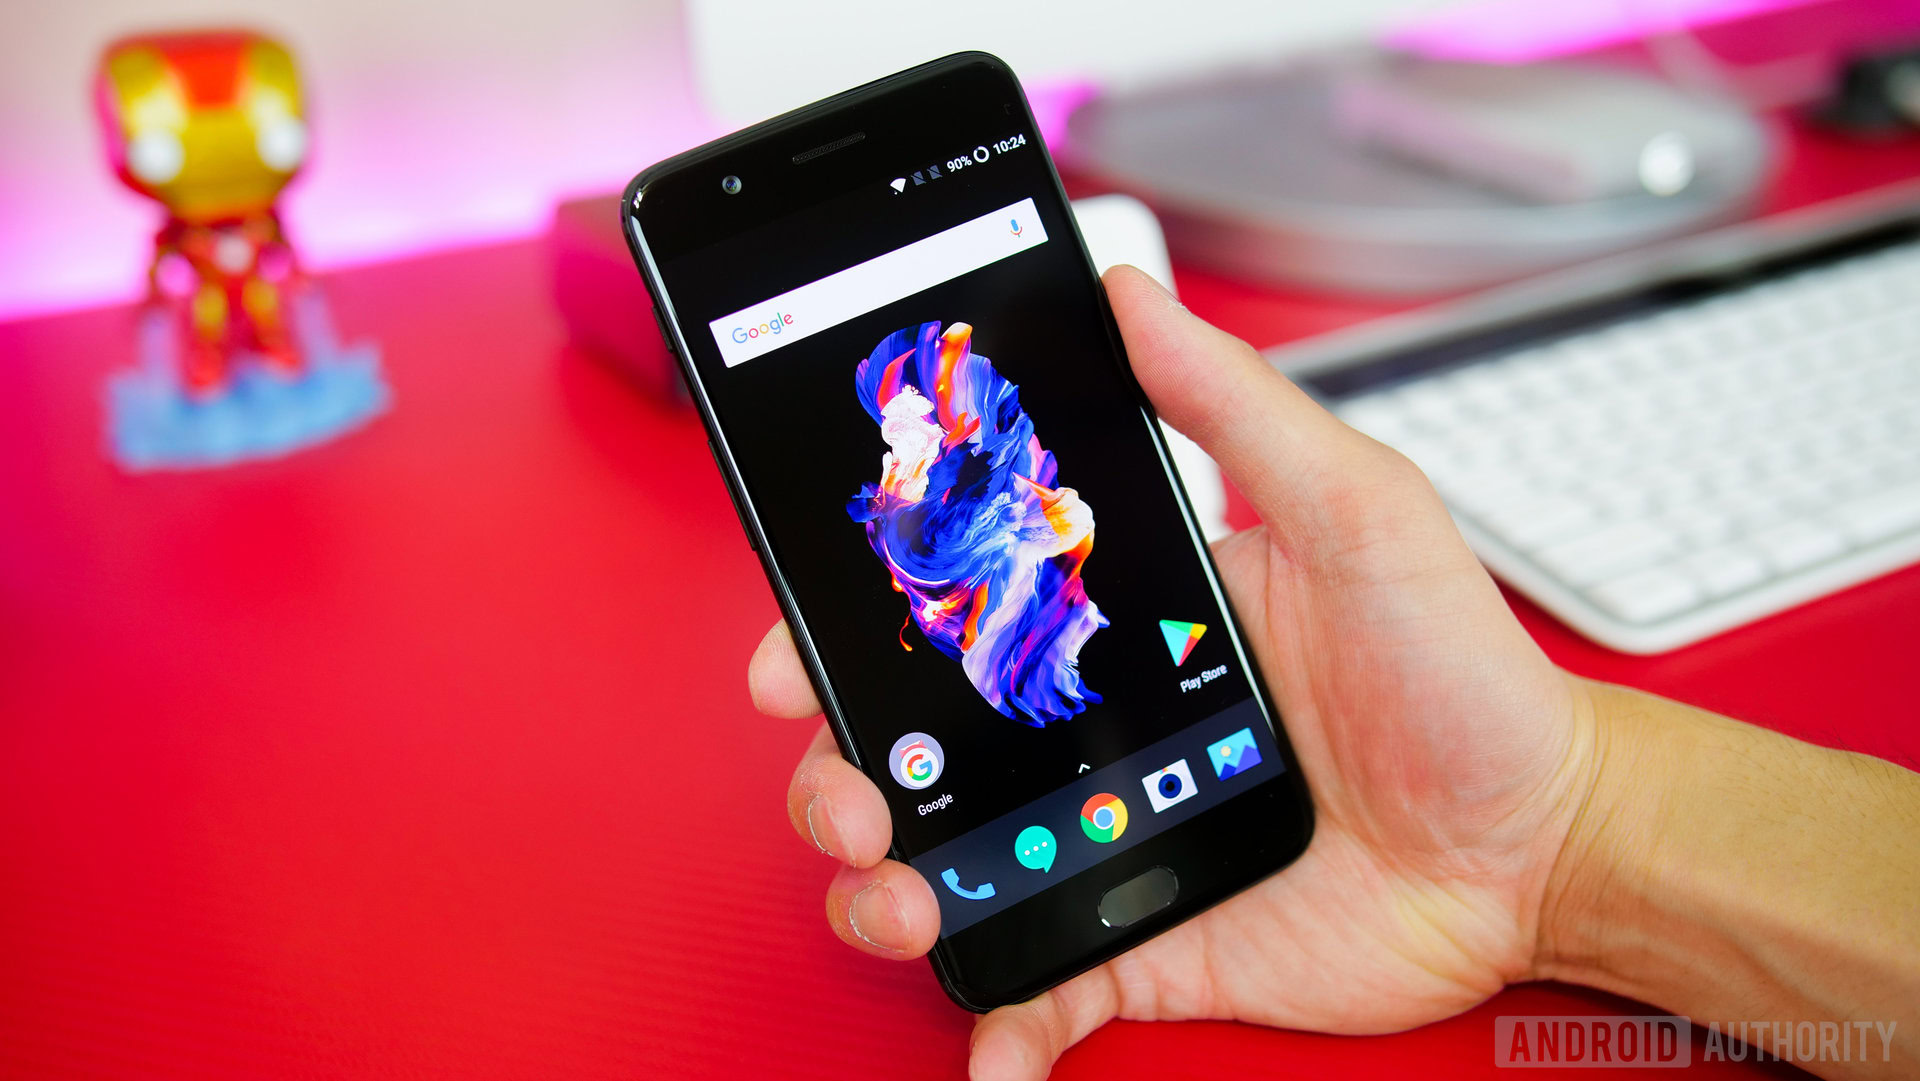 How to change wallpaper in oneplus 5